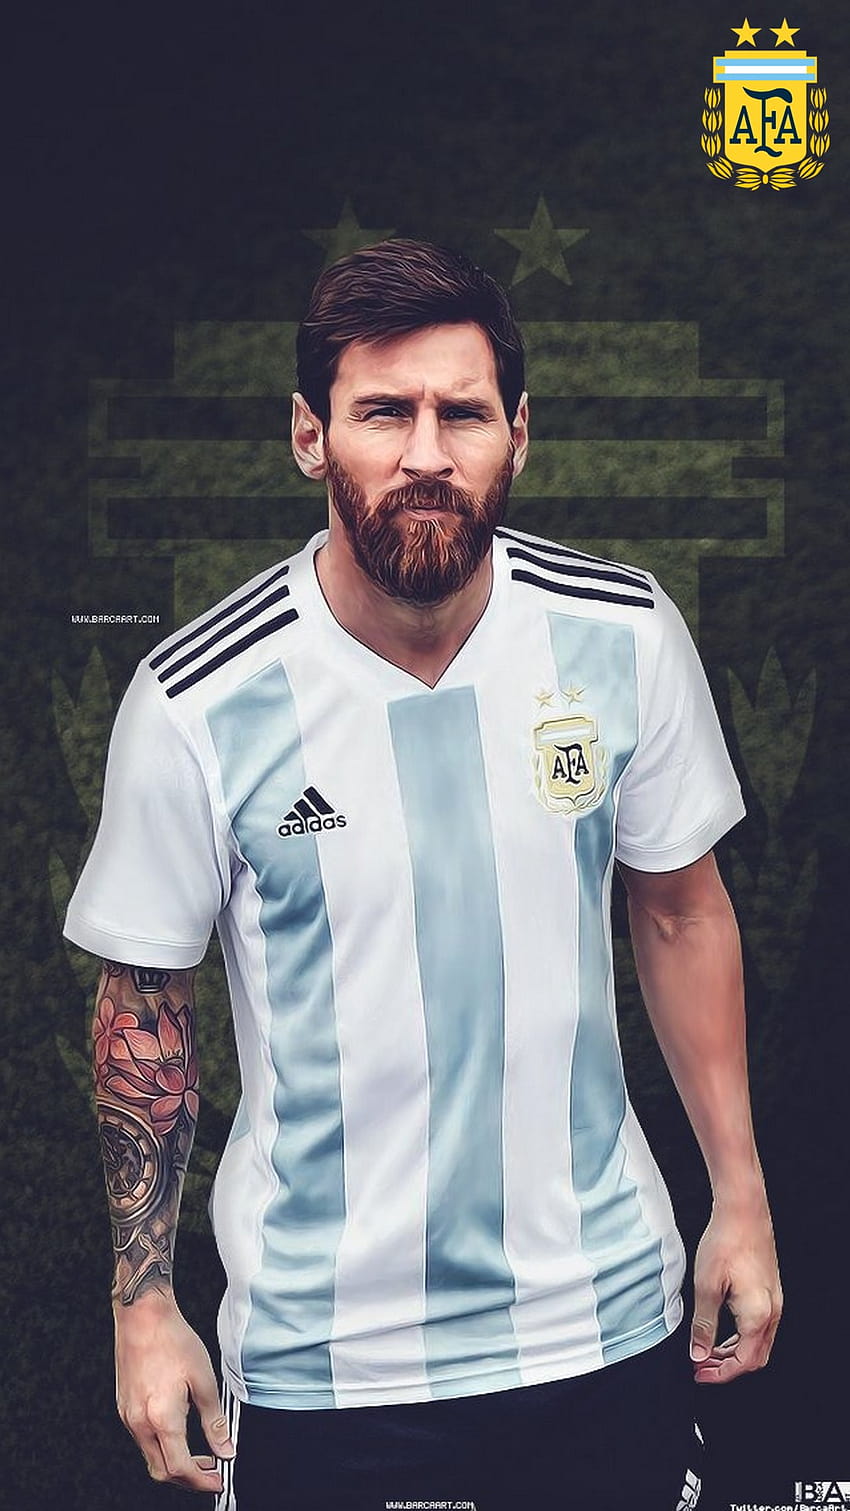 387475 Lionel Messi Soccer player 4k - Rare Gallery HD Wallpapers